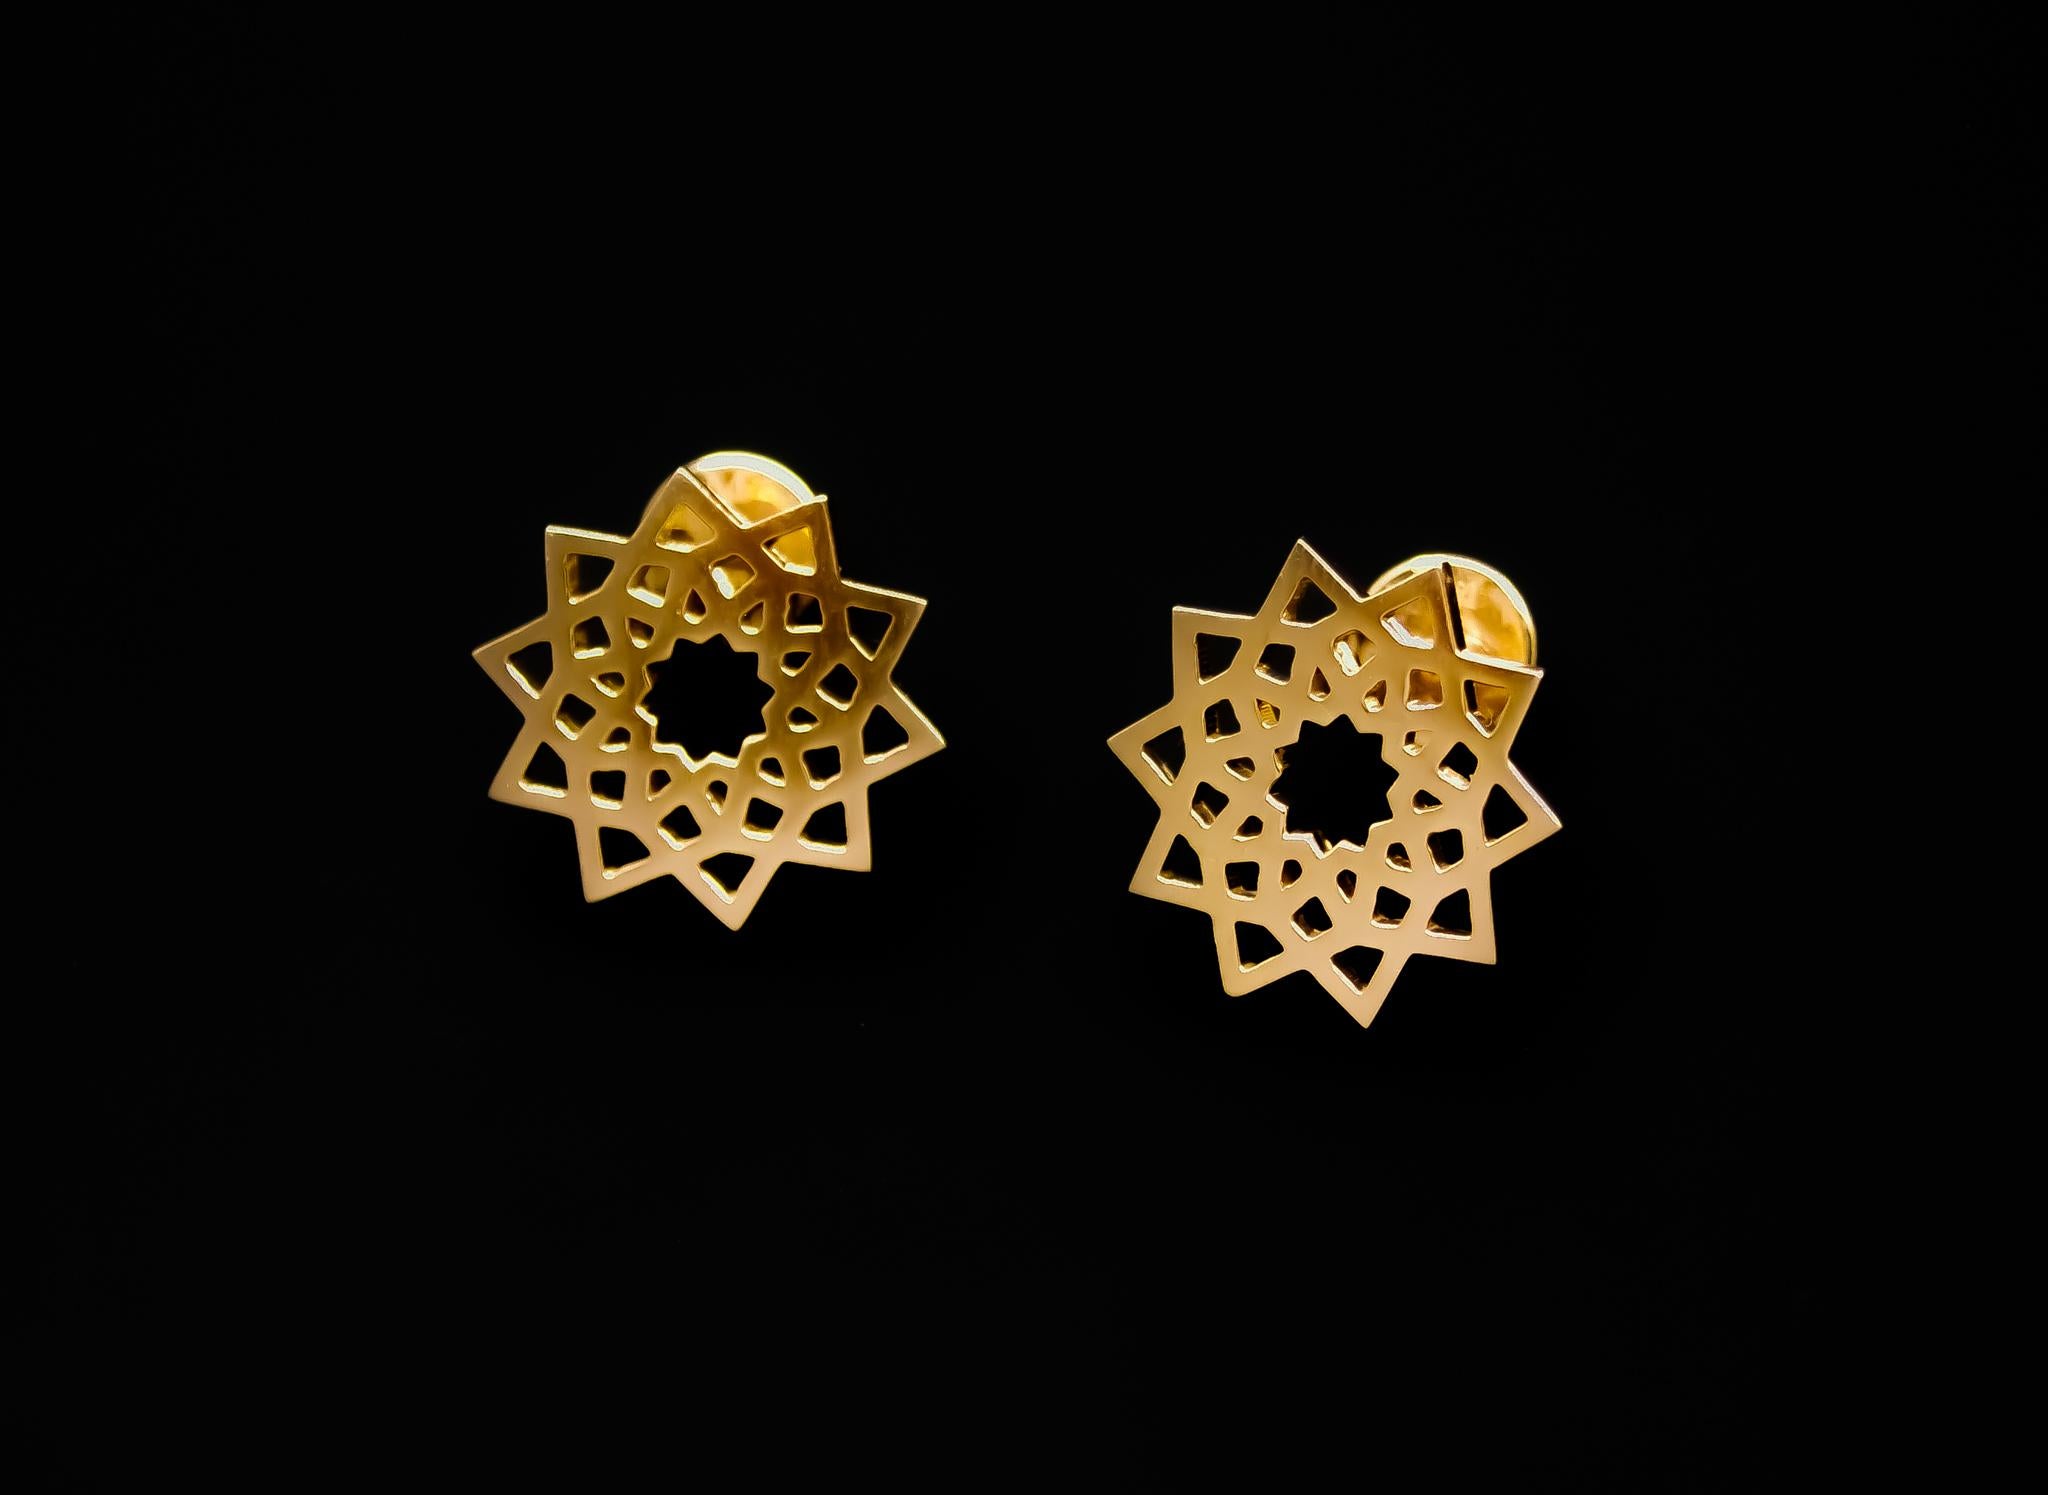 Arabesque Deco Andalusian Style Stud Earrings in 18kt Gold

The design of the earrings is inspired by the Andalusian Style and Motifs found in Al Hambra Palace in Granada in Spain